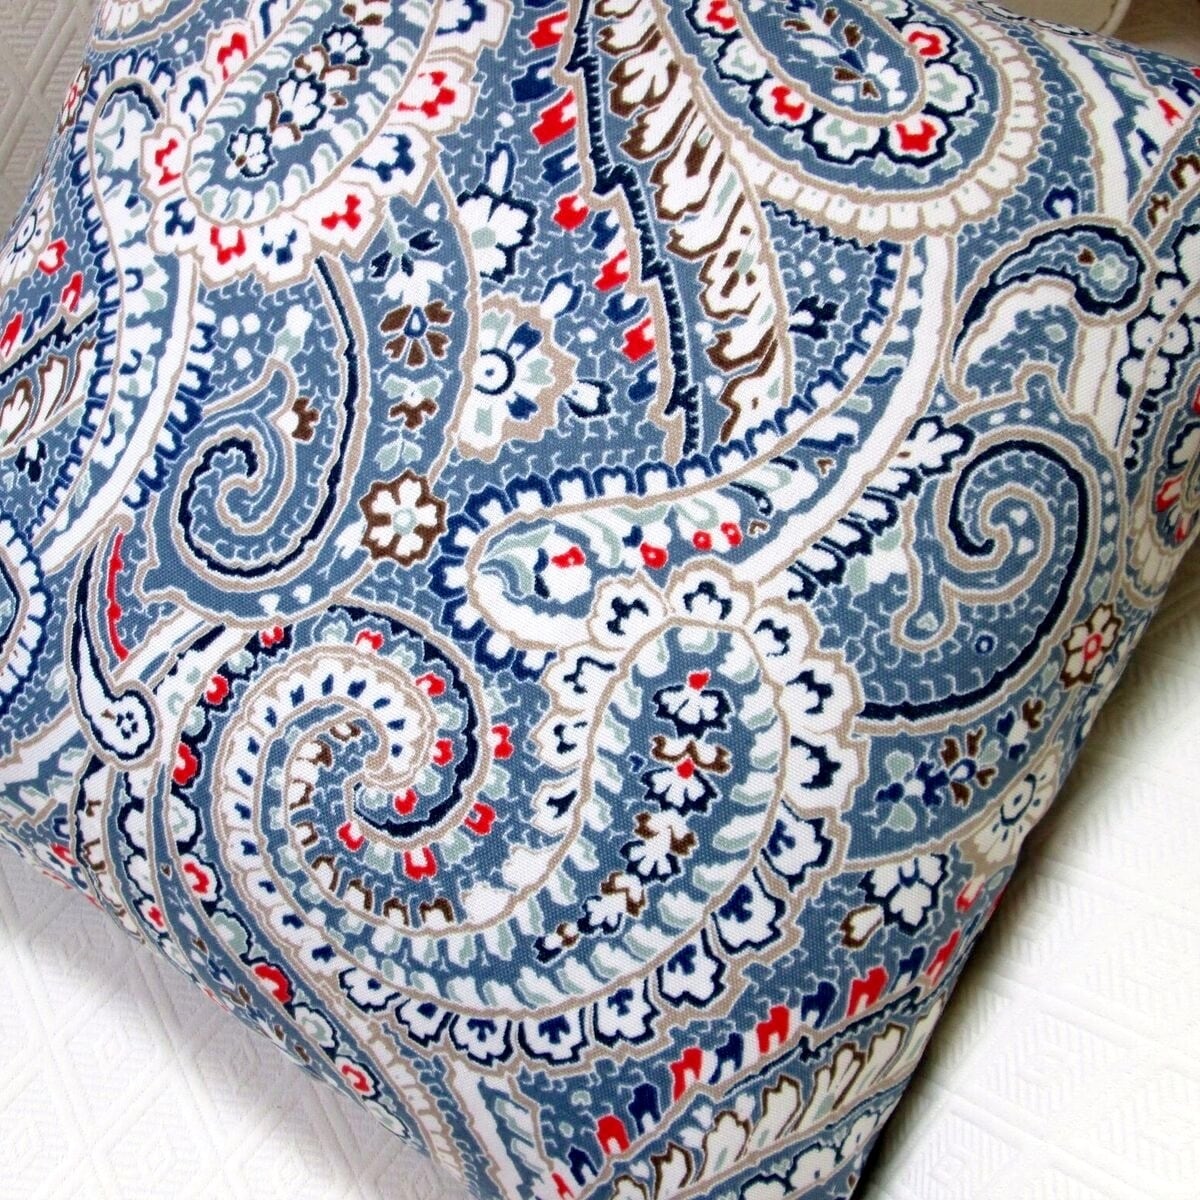 https://ak1.ostkcdn.com/images/products/17008337/Artisan-Pillows-18-inch-Indoor-Outdoor-Geometric-Paisley-in-Blue-Red-Pillow-Cover-Only-Set-of-2-6b9918bc-f9d2-4626-9c16-e7c3ac0e347b.jpg